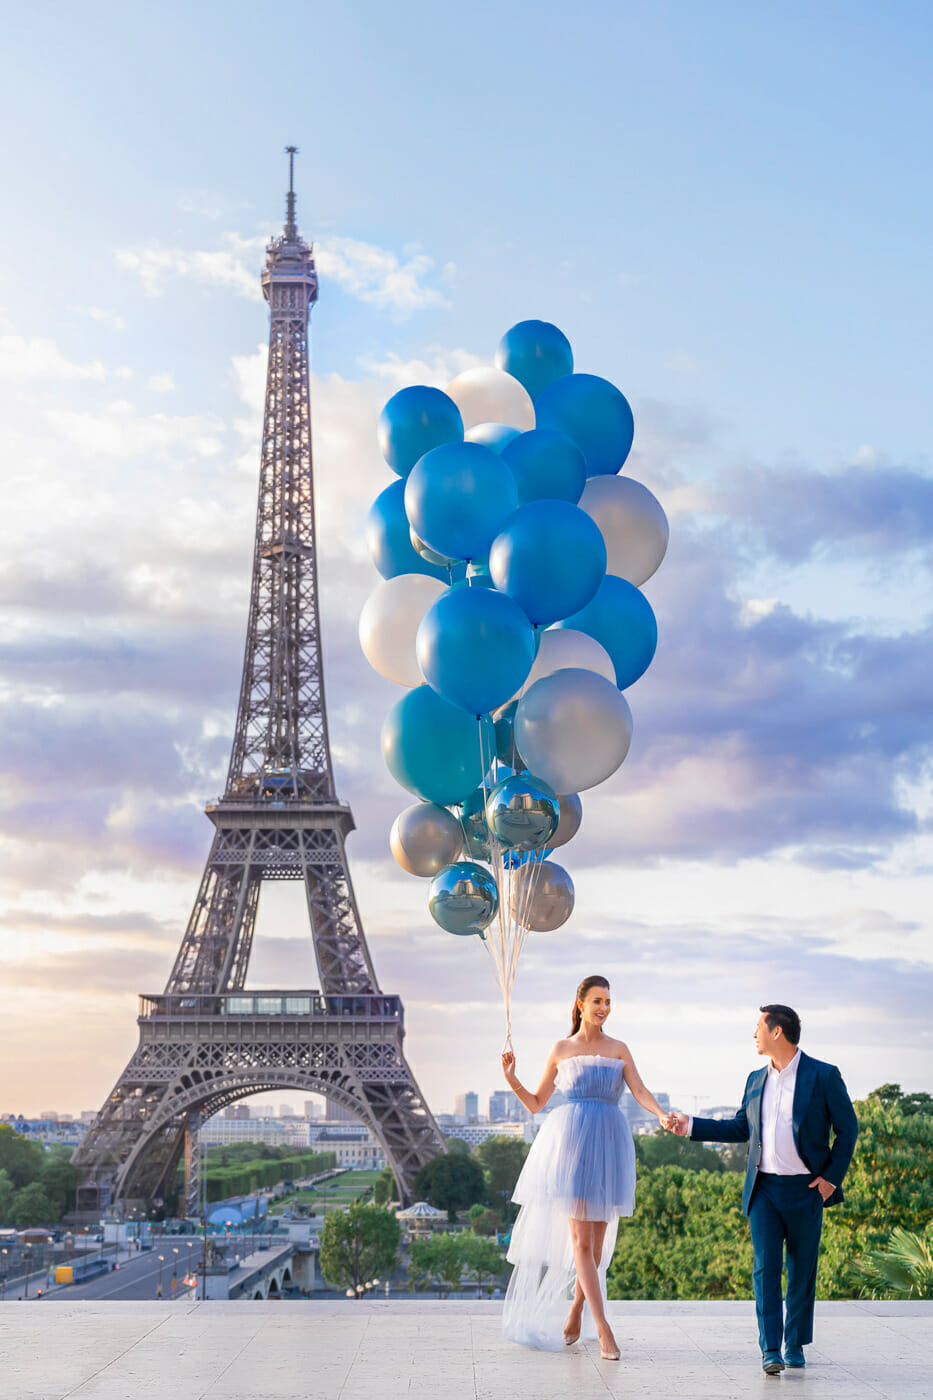 Family photoshoot in Paris maternity shoot in front of the Eiffel Tower with massive balloons